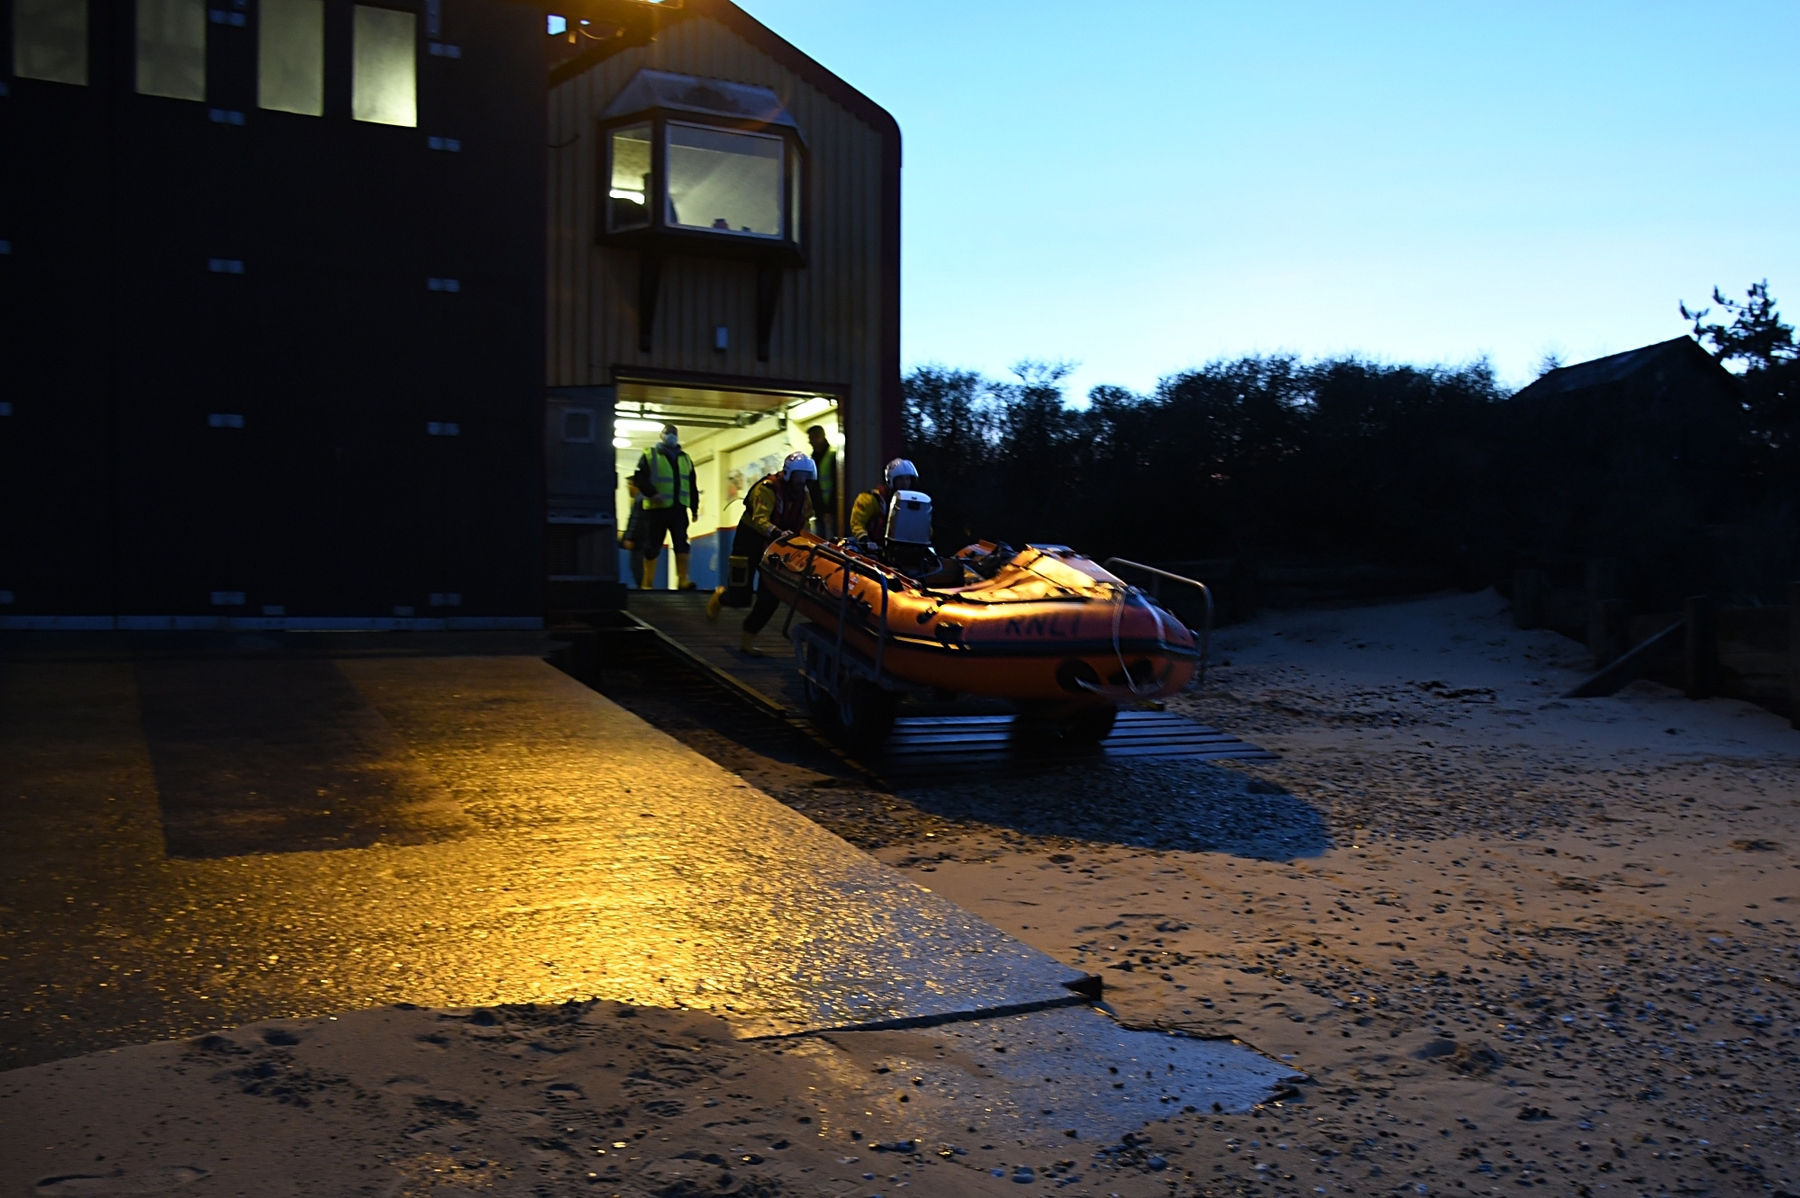 Wells inshore lifeboat launching on service to Burnham Overy